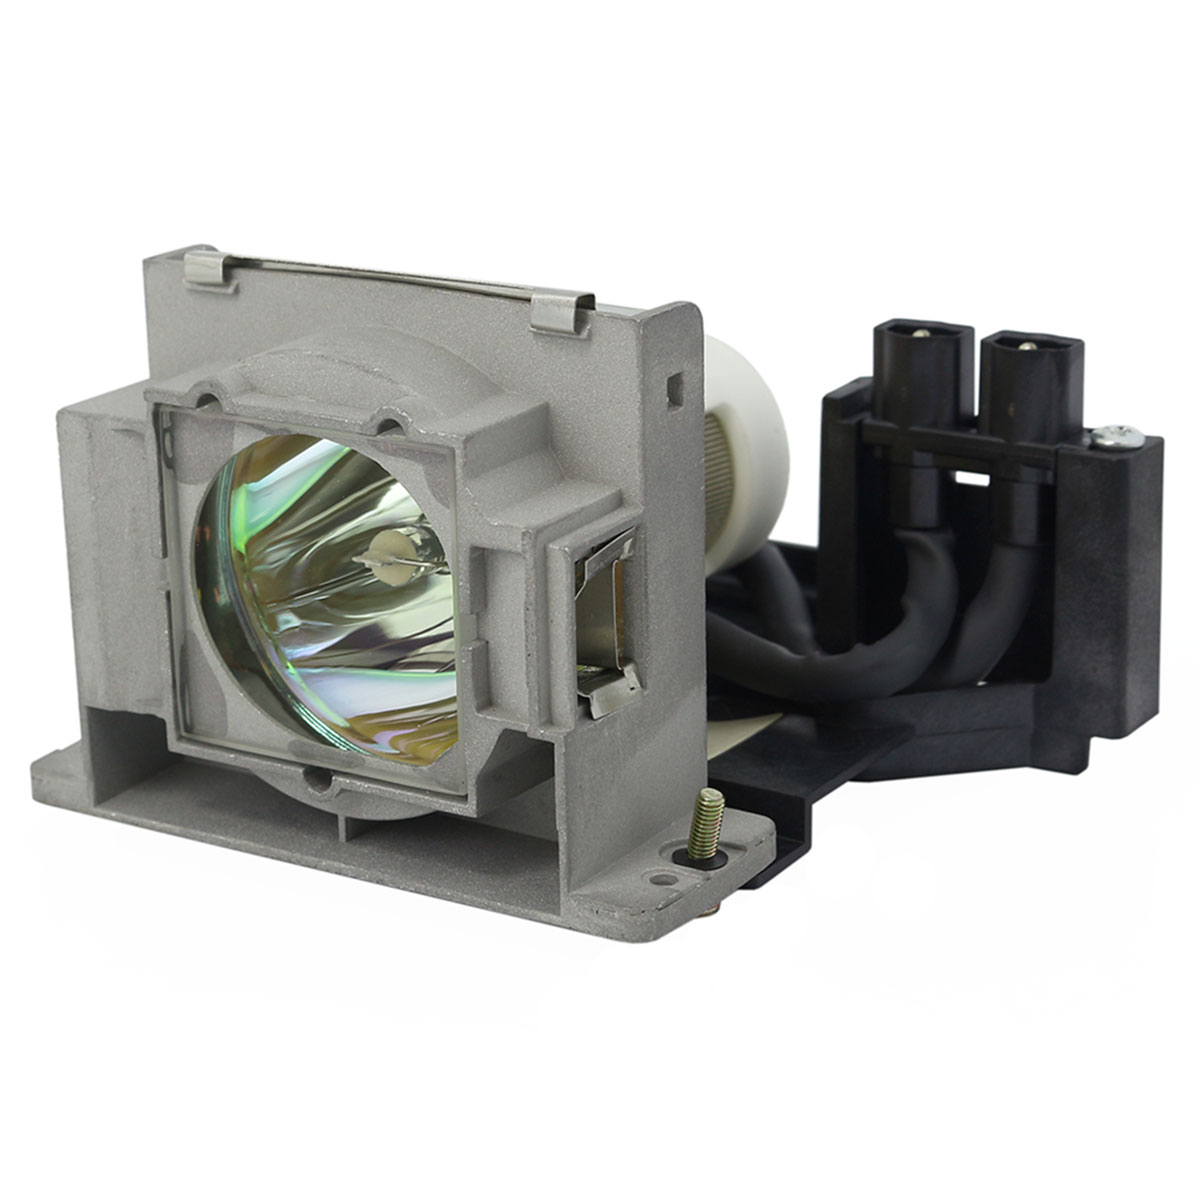 Osram PVIP Replacement Lamp & Housing for the Mitsubishi LVP-XD480U Projector - image 3 of 6